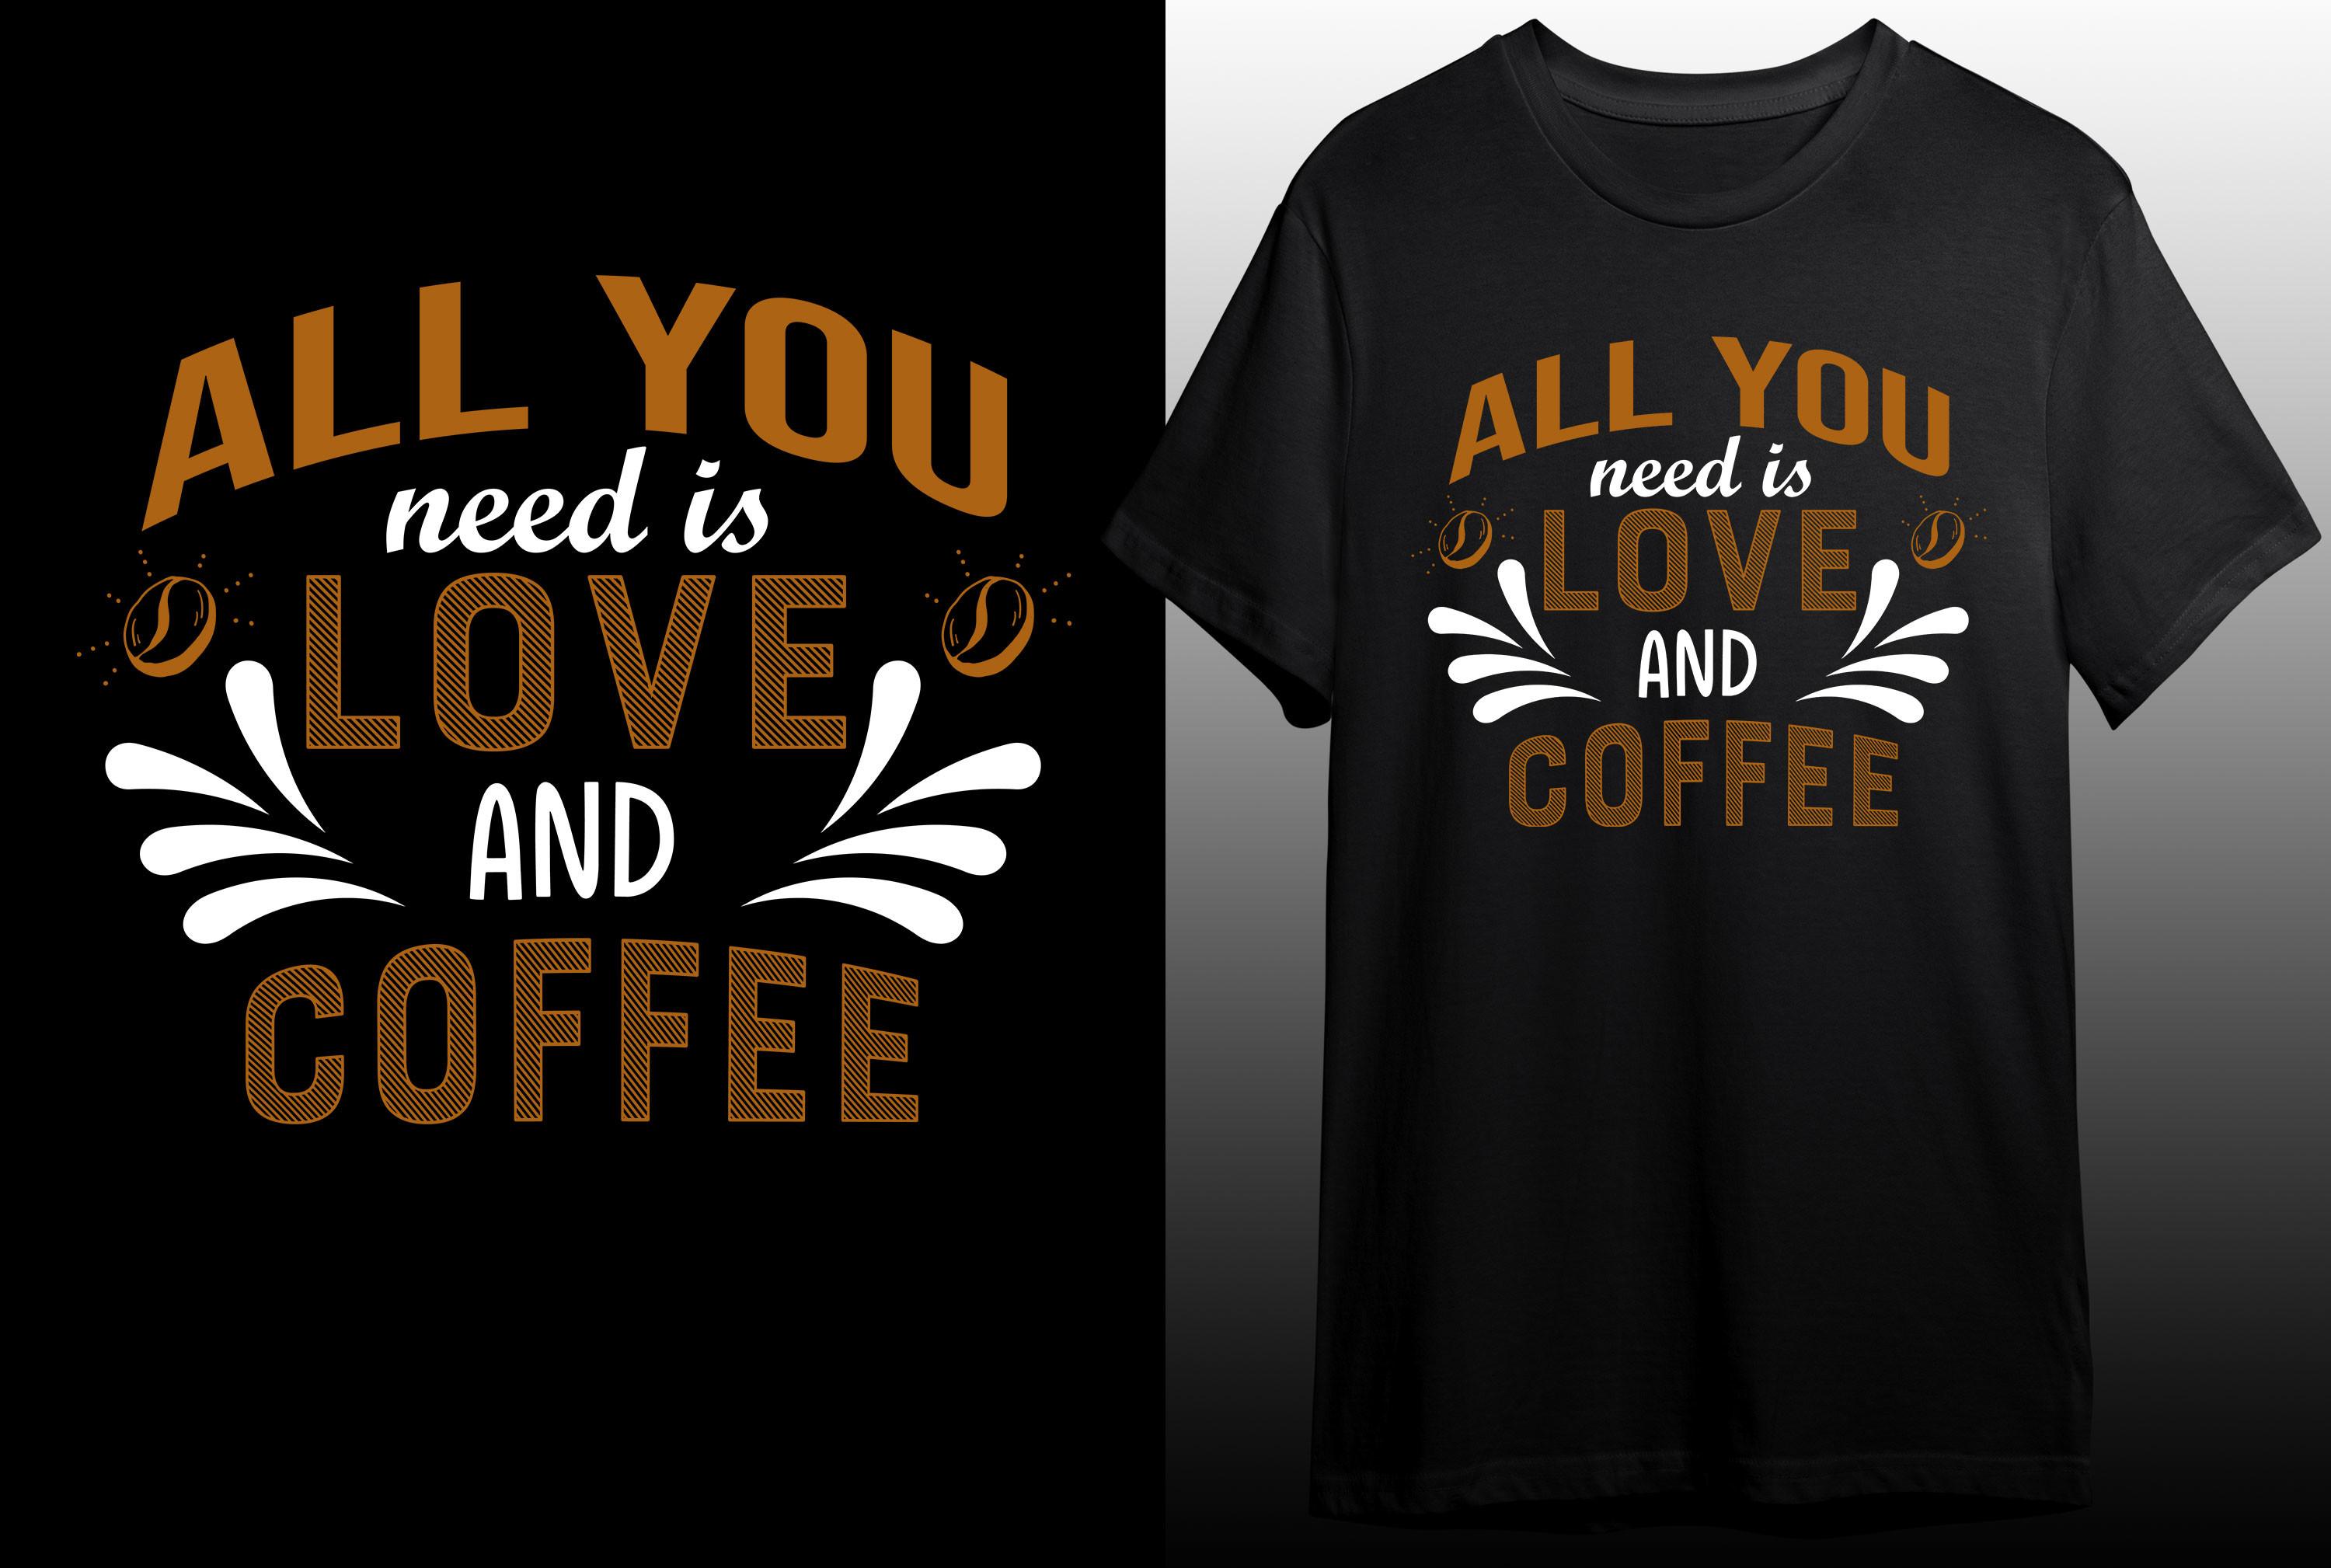 All You Need is Love and-coffee T-shirt